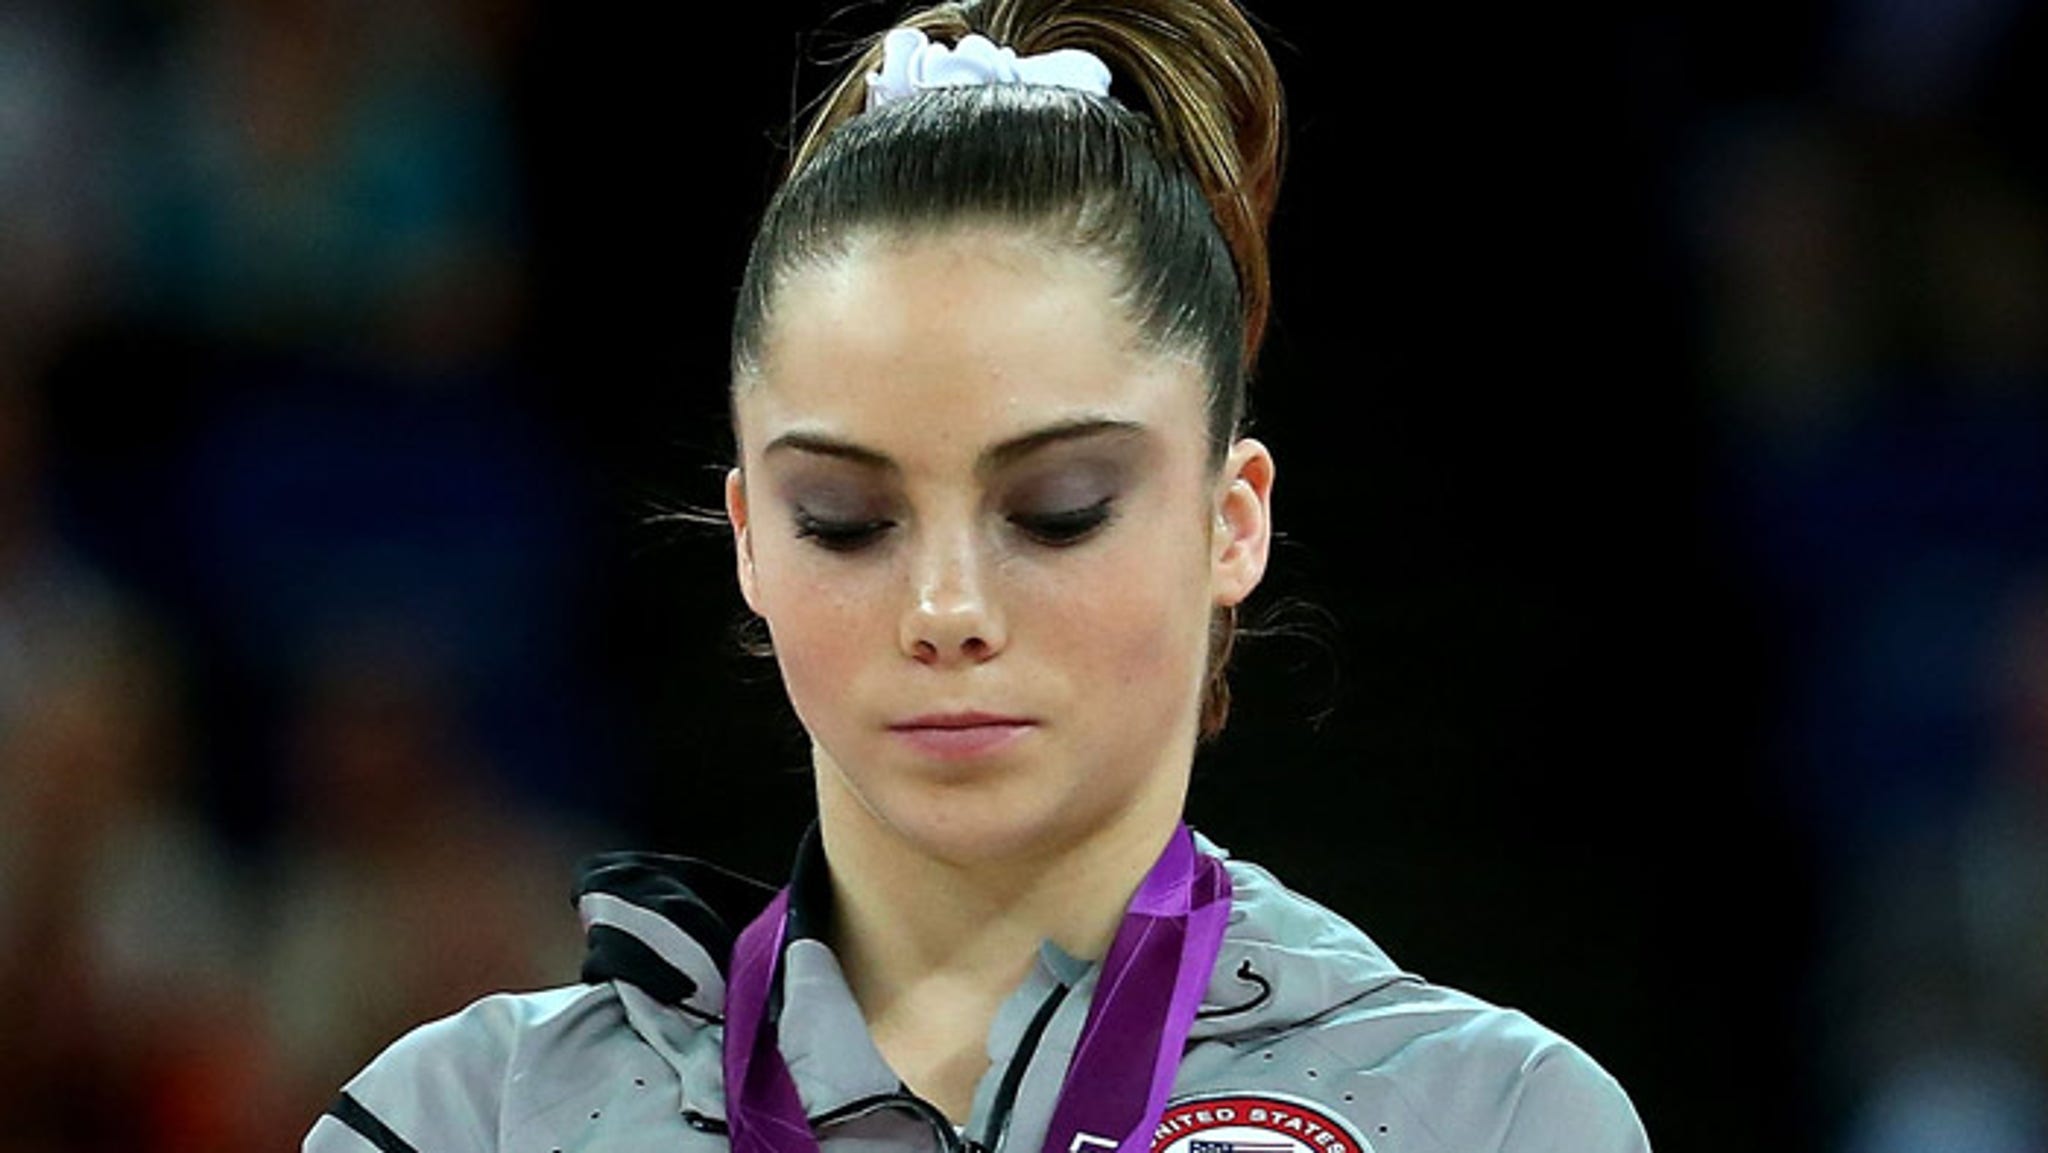 Olympic gymnast McKayla Maroney says she was under 18 when the hacked nude ...